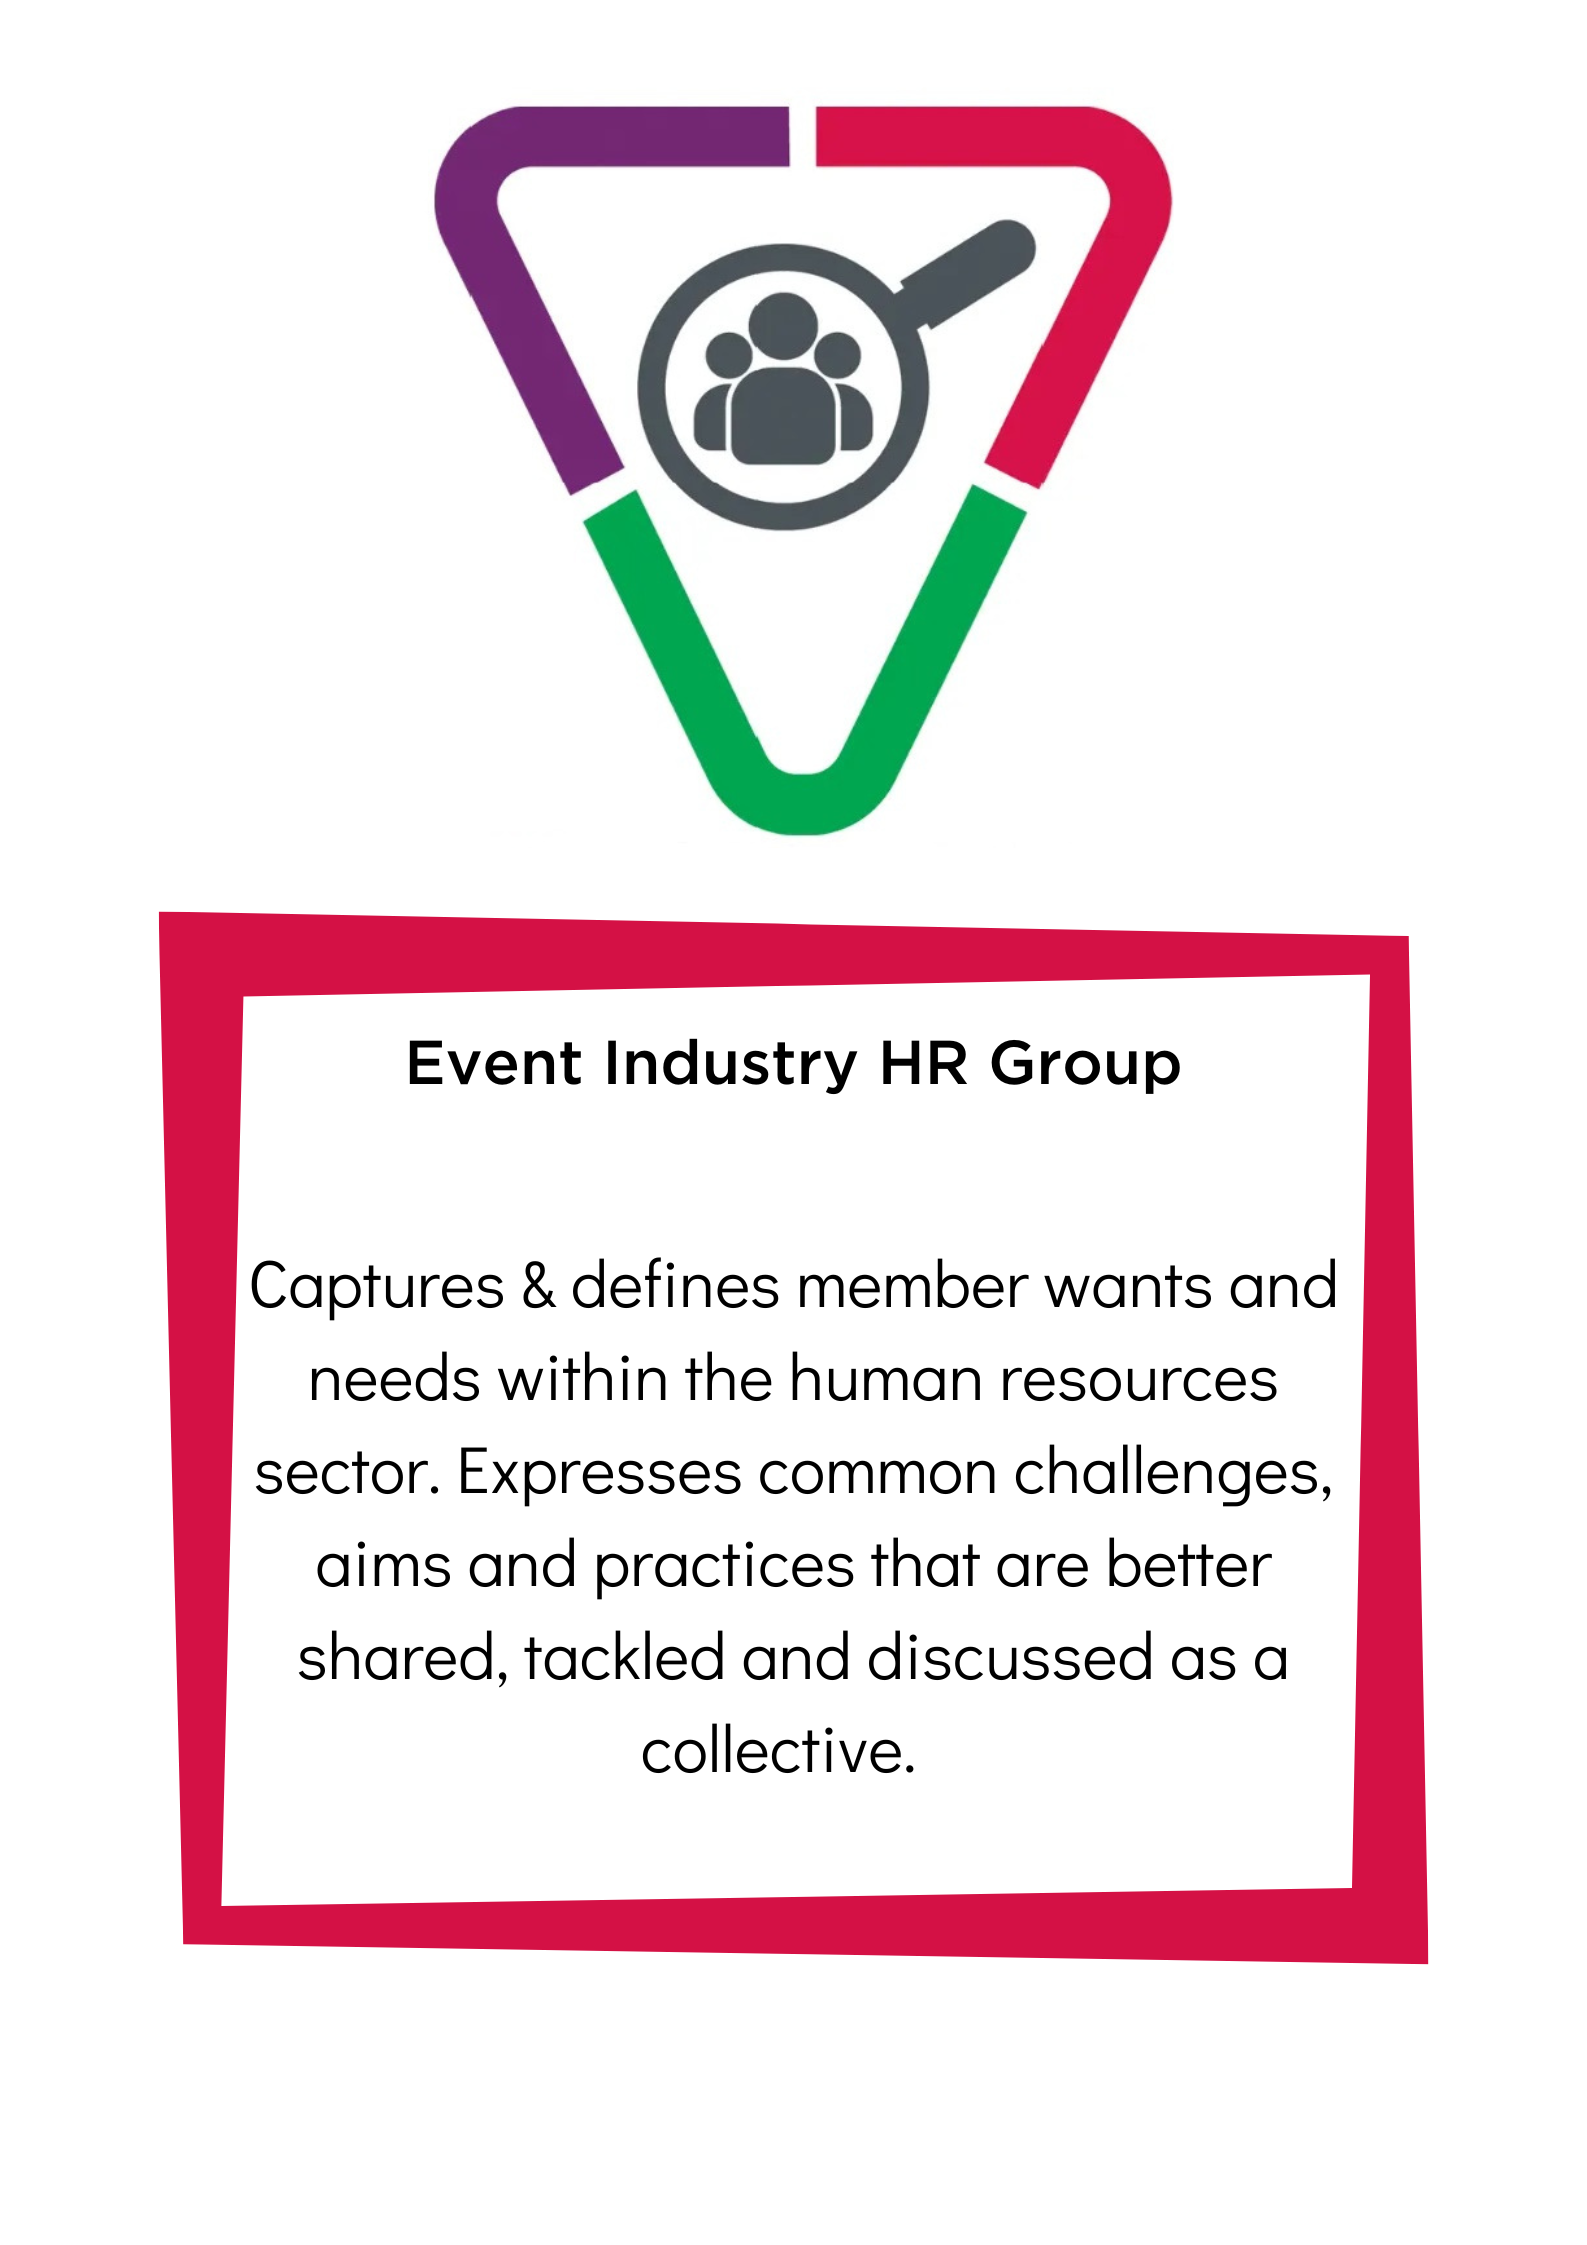 Event industry HR